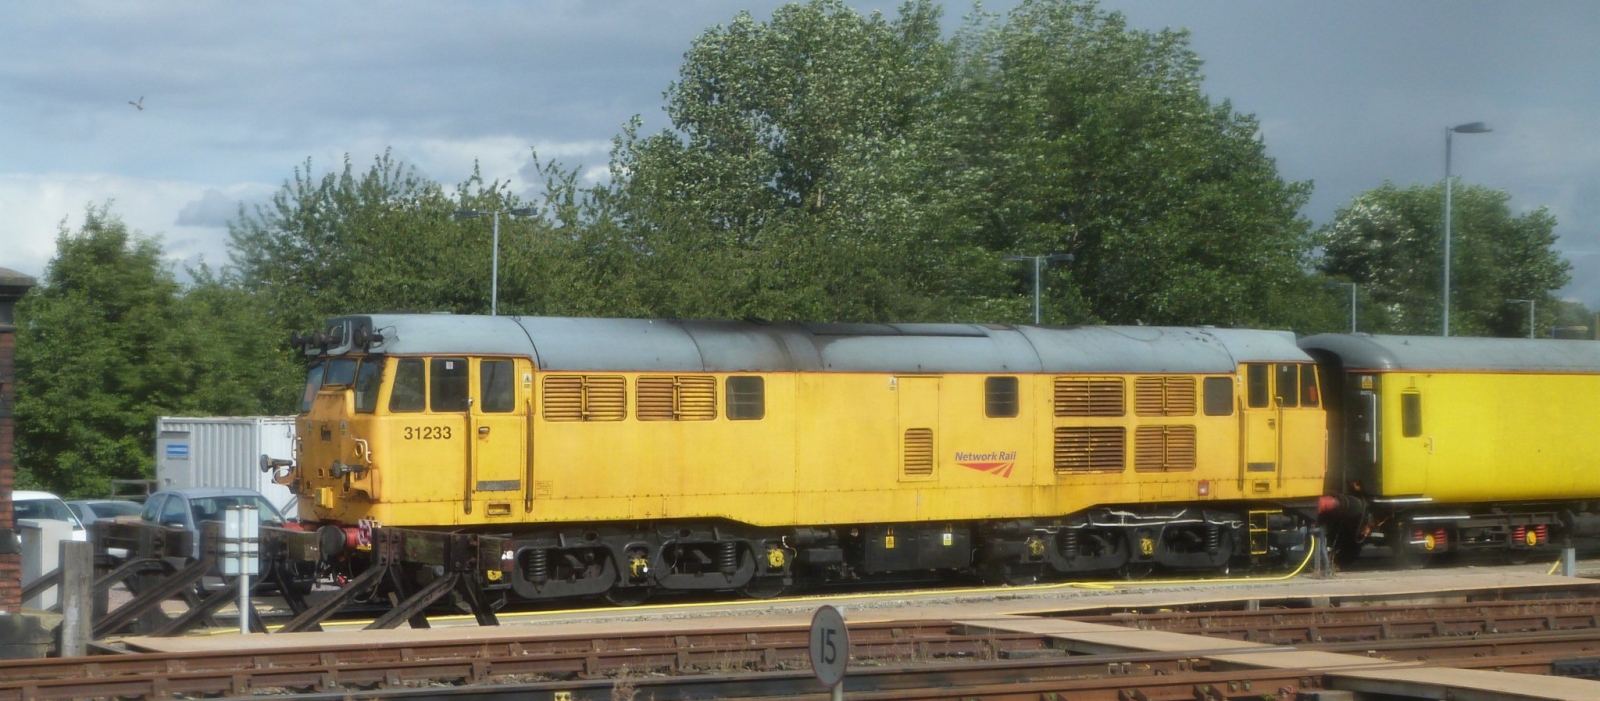 Network Rail 31233 in August 2013 with a test train at Shrewsbury